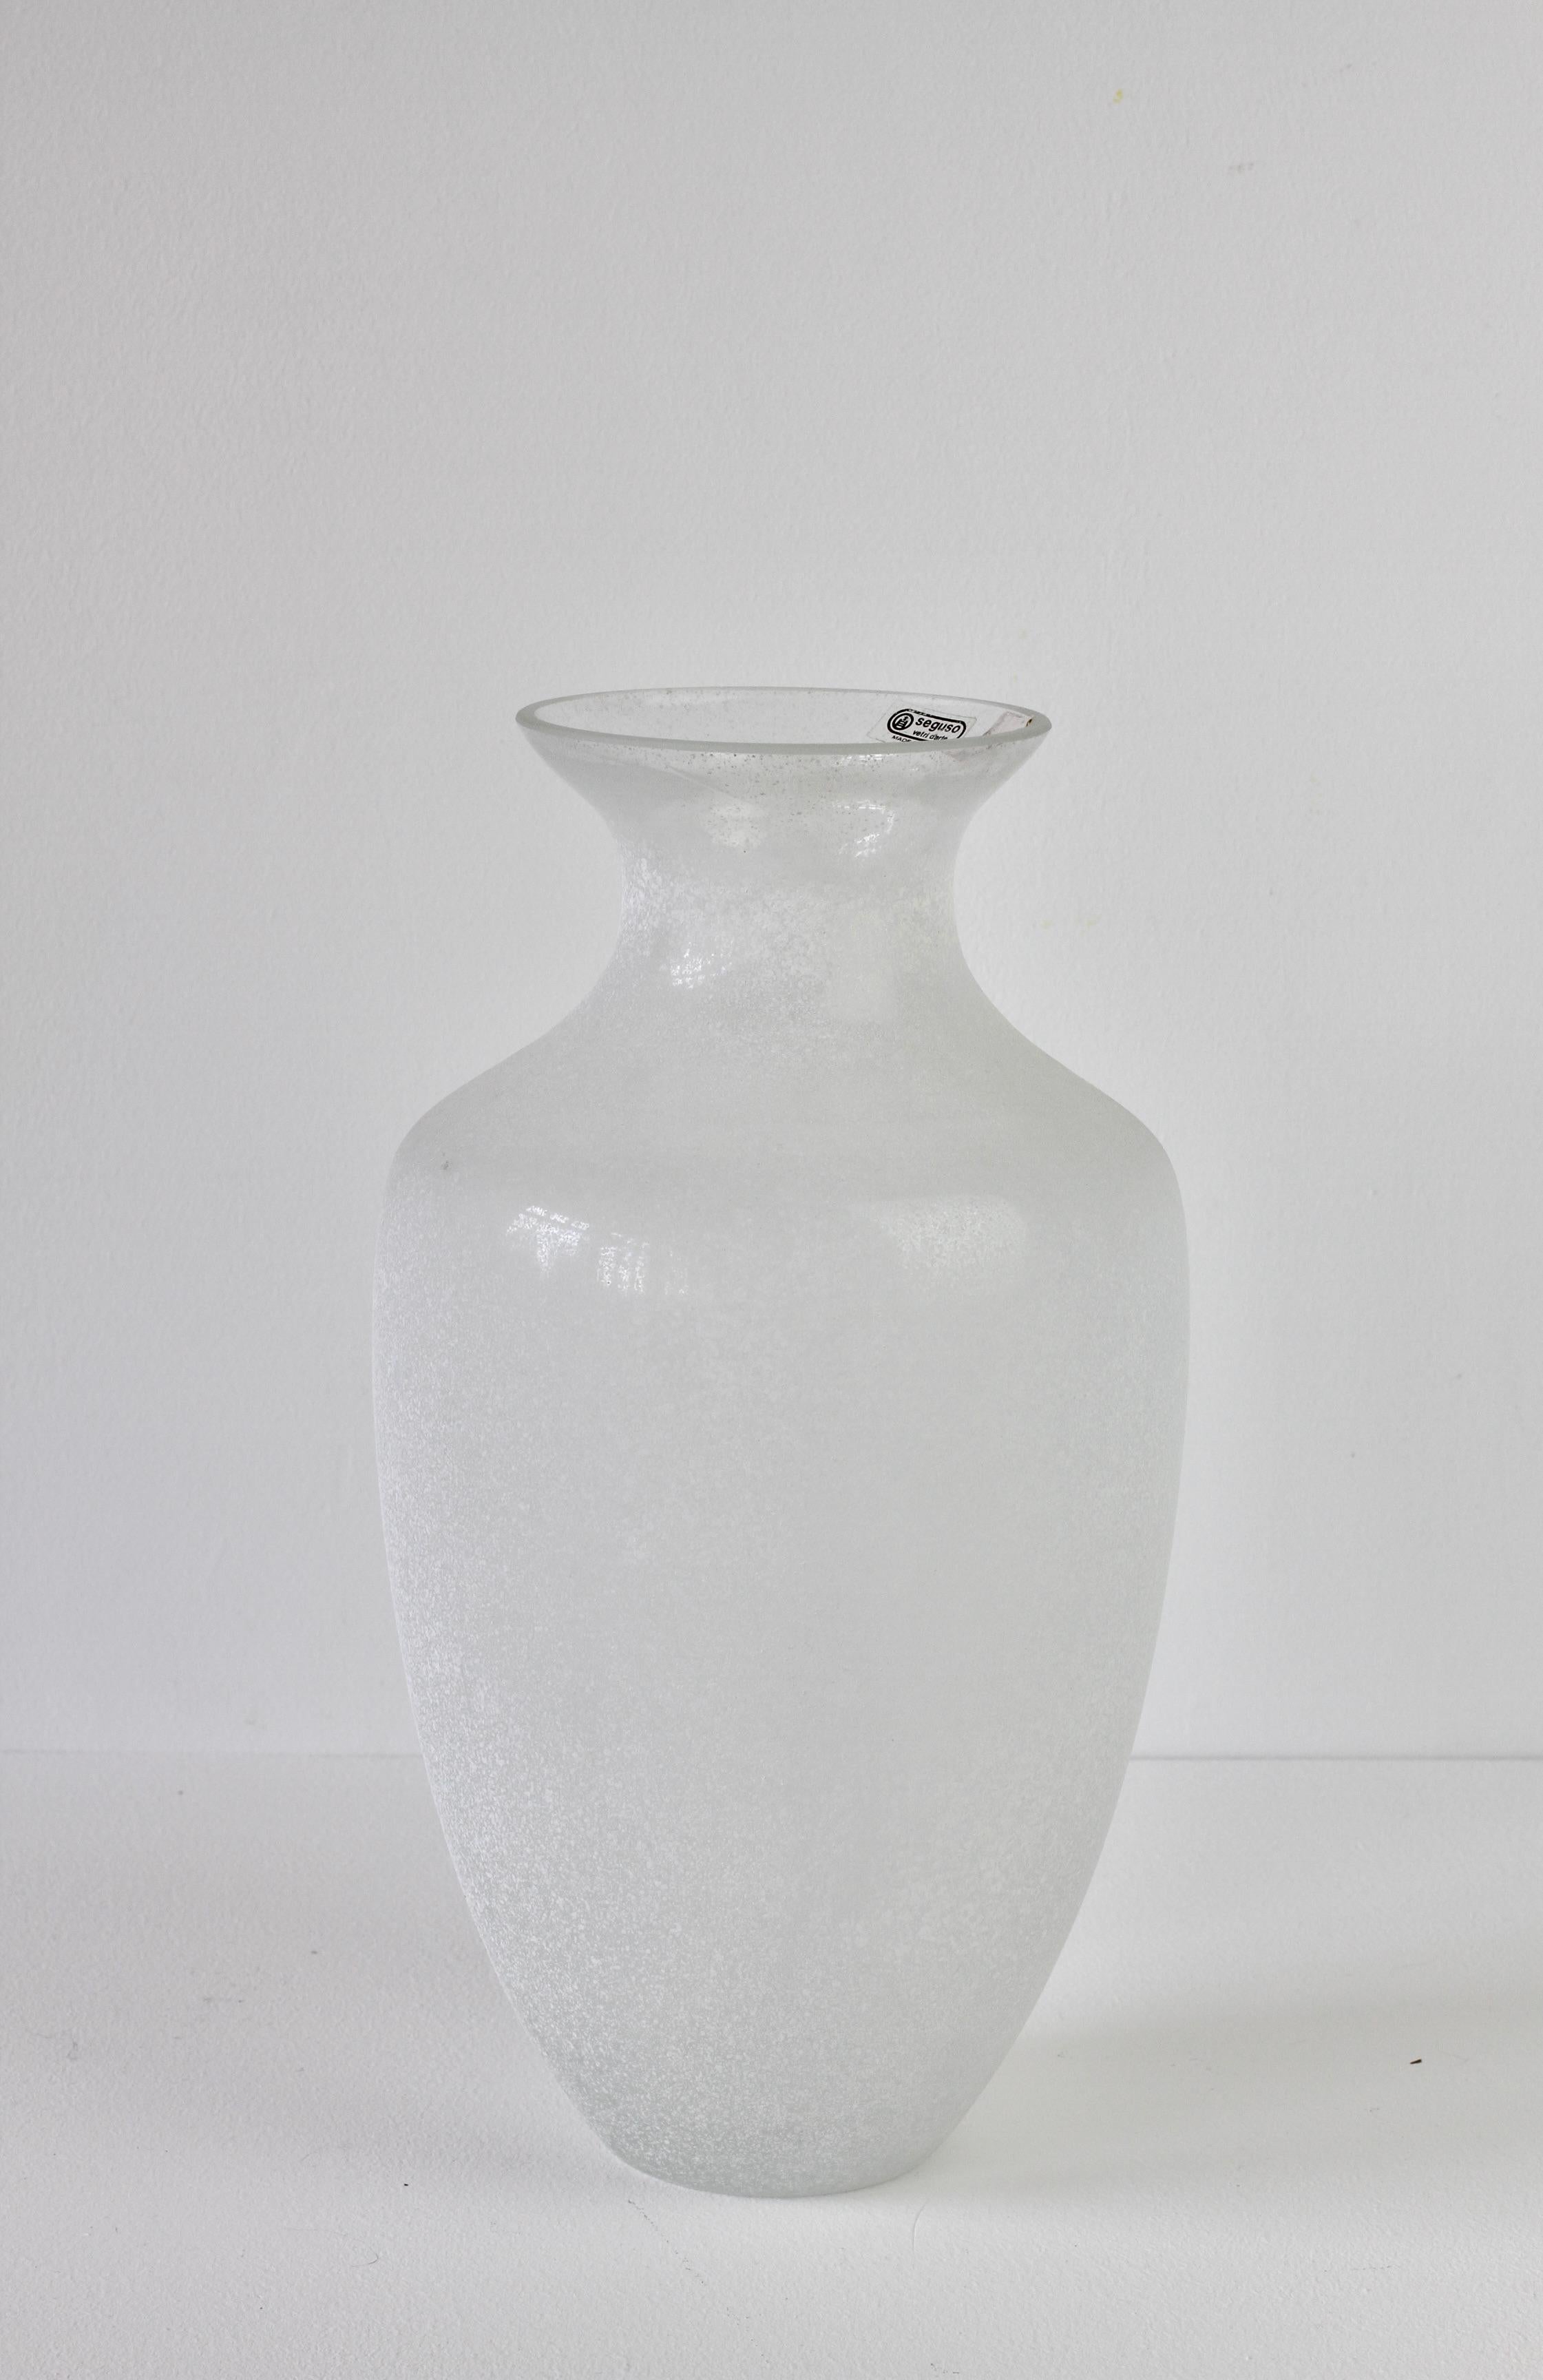 Elegant vintage Italian 13.5 inch tall 'a Scavo' white colored / coloured glass Amphora or vase by Seguso Vetri d'Arte Murano, Italy. Elegant in form and showing extraordinary craftsmanship with the use of the 'Scavo' technique to replicate to look